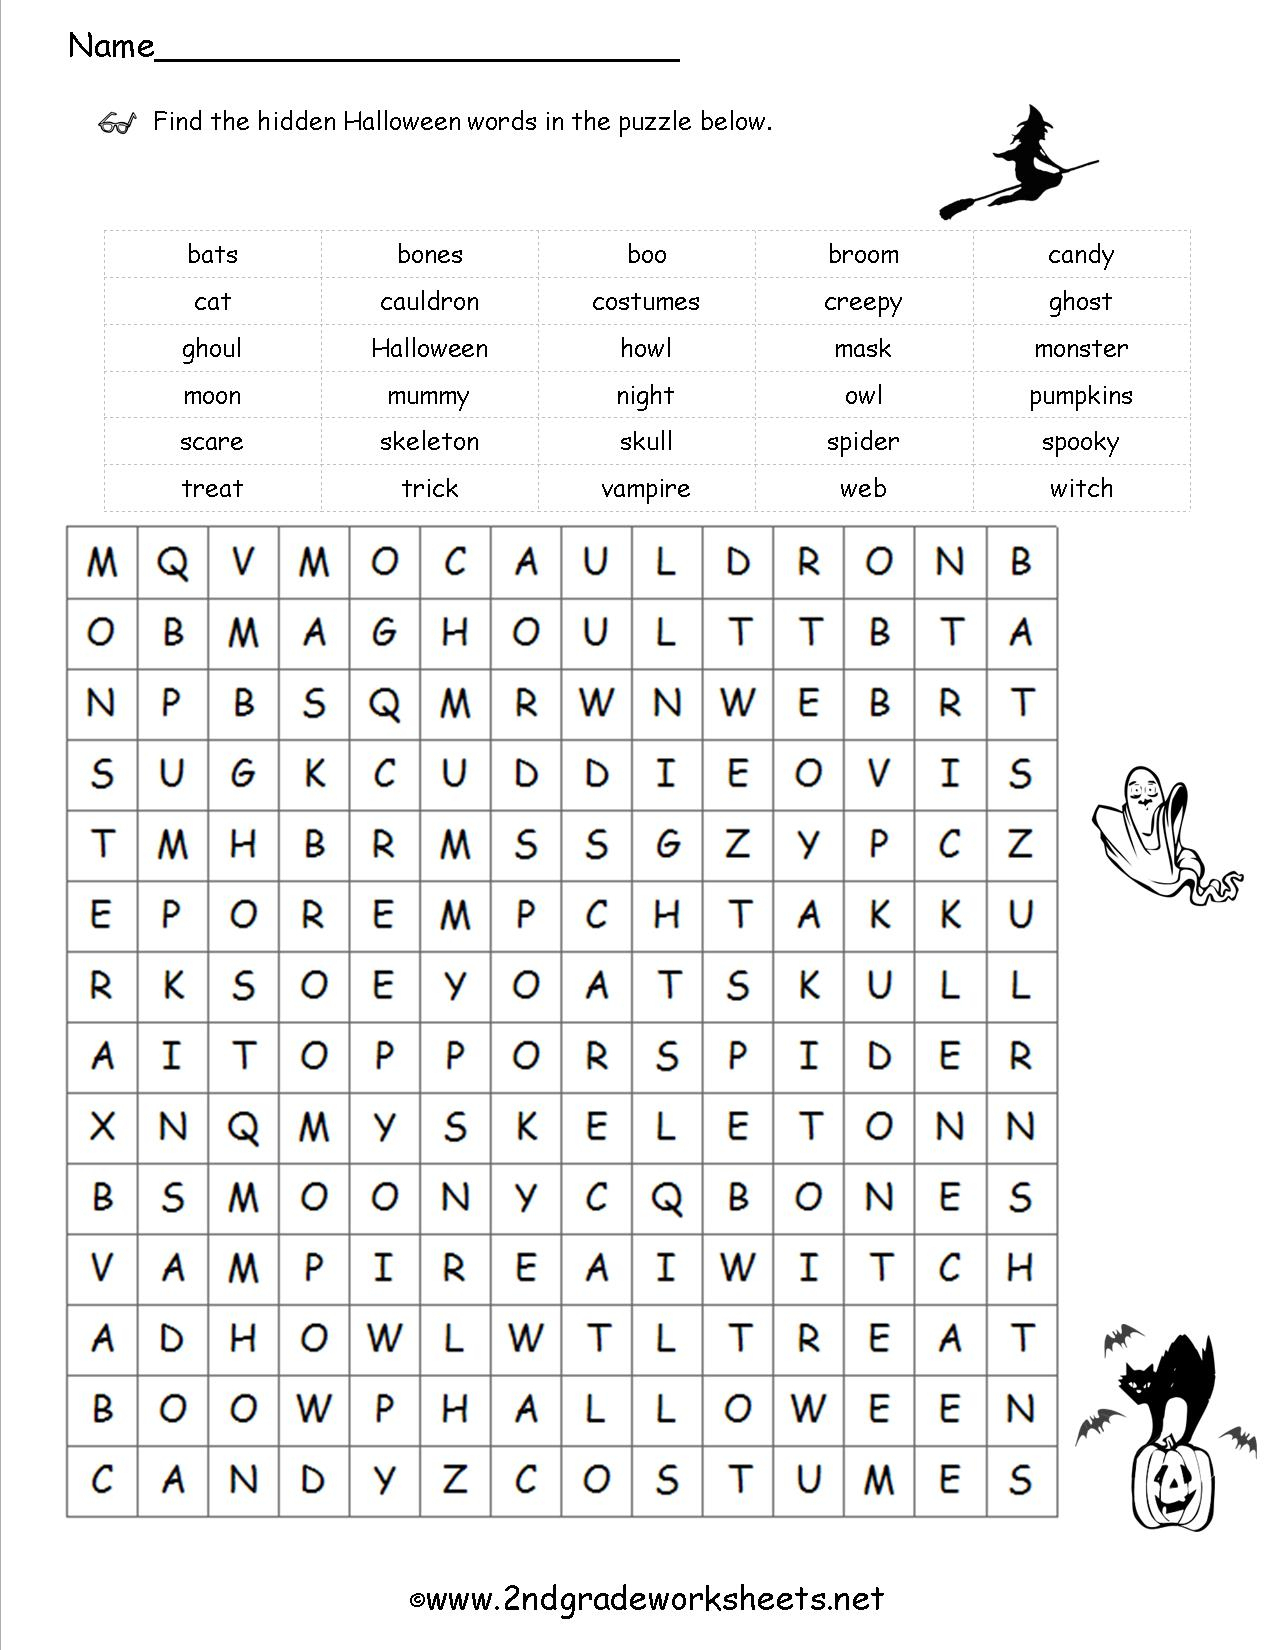 Halloween Worksheets And Printouts - Free Printable Activities